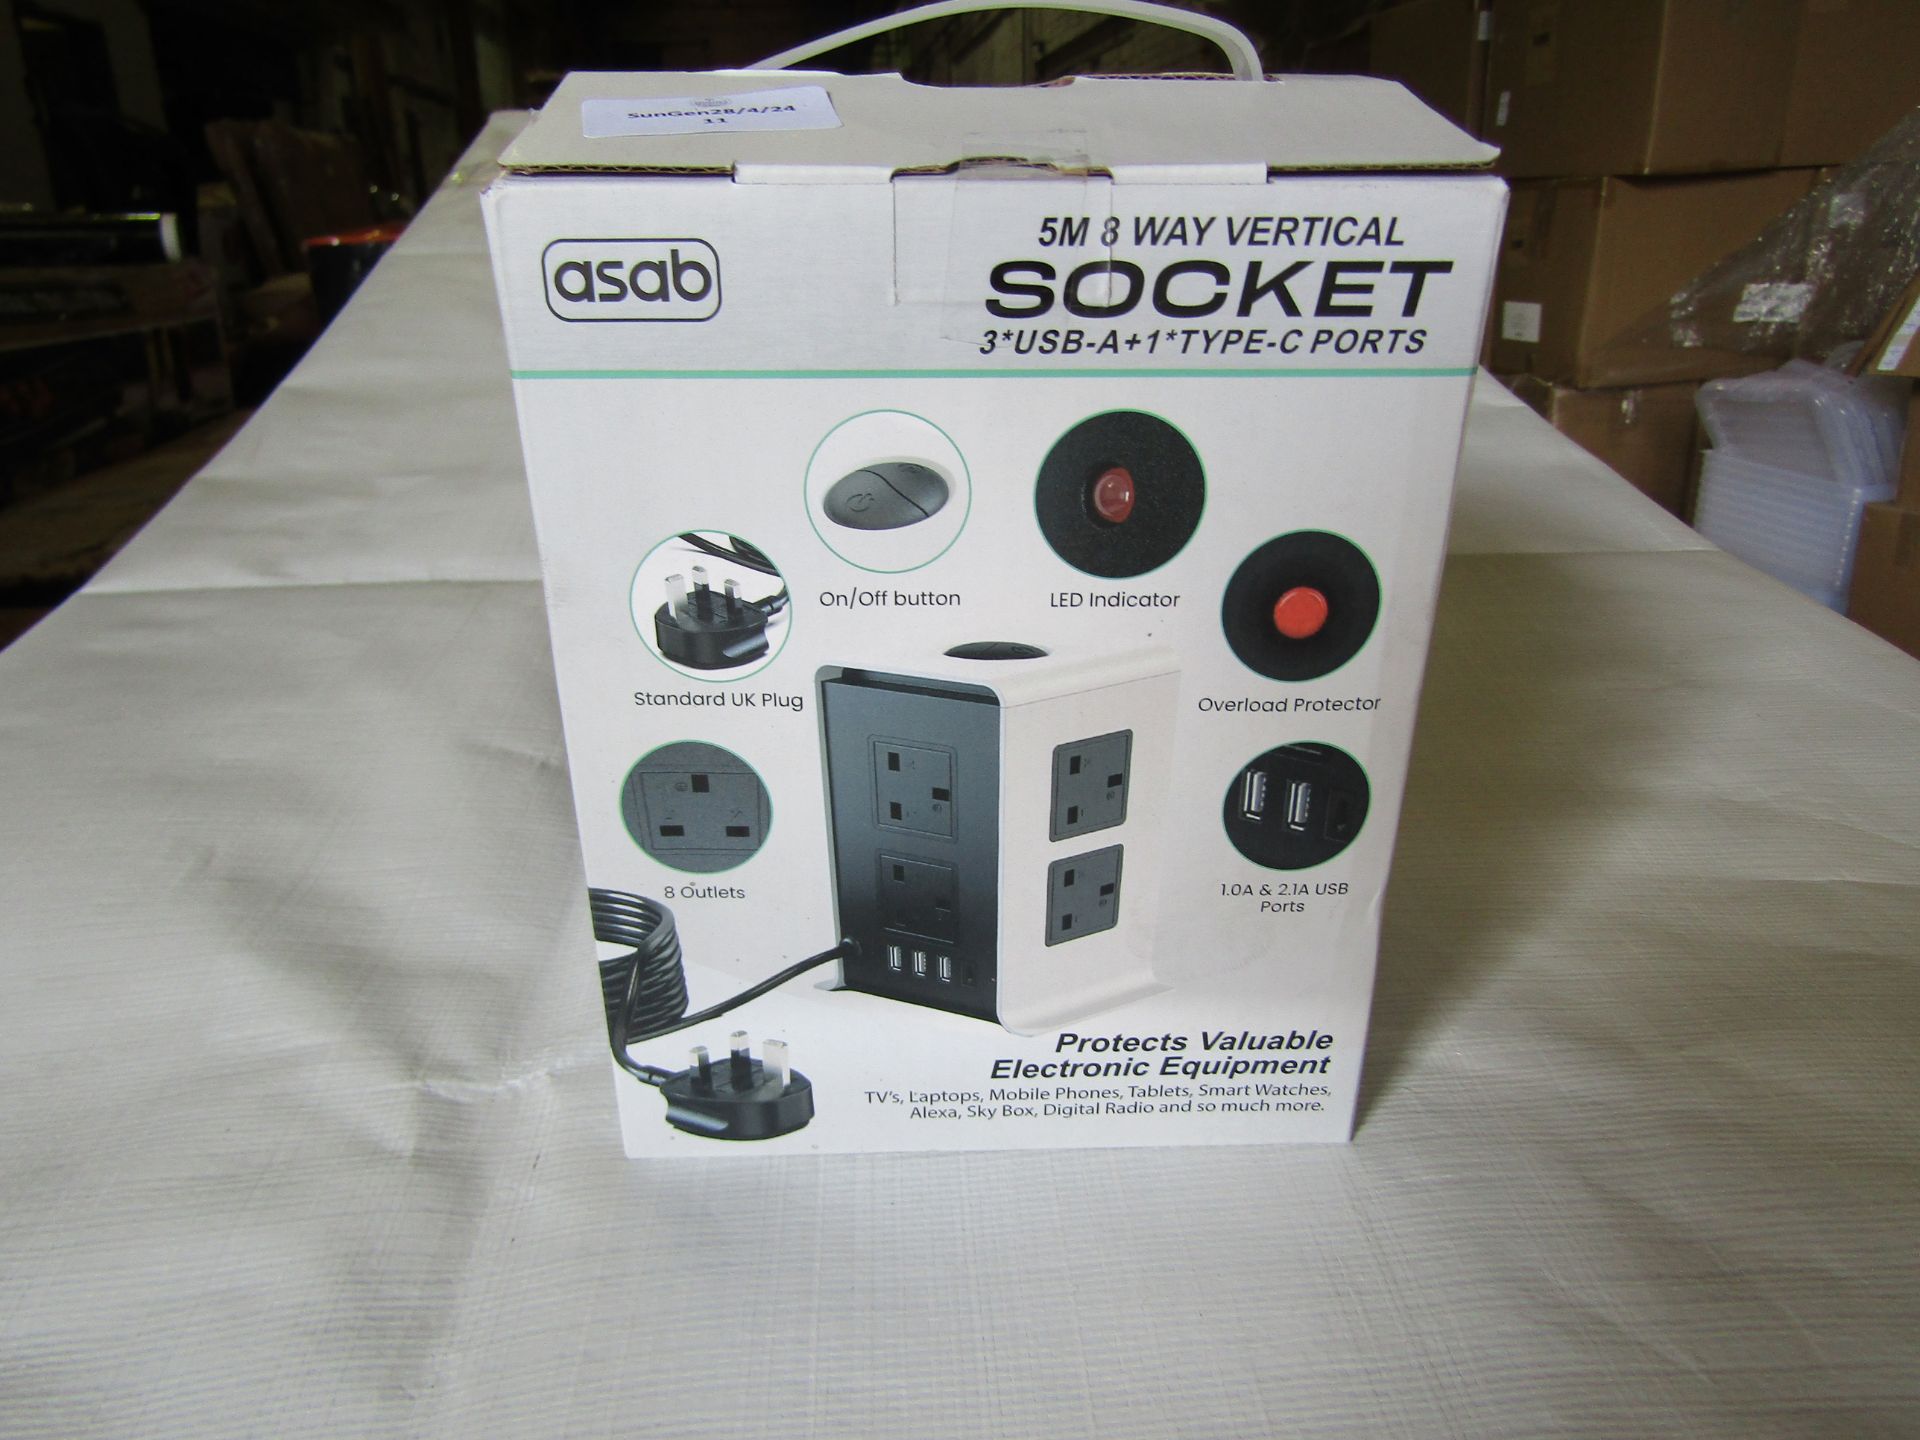 Asab 5M 8 Way Vertical Socket With 3 USB Ports - Unchecked & Boxed.